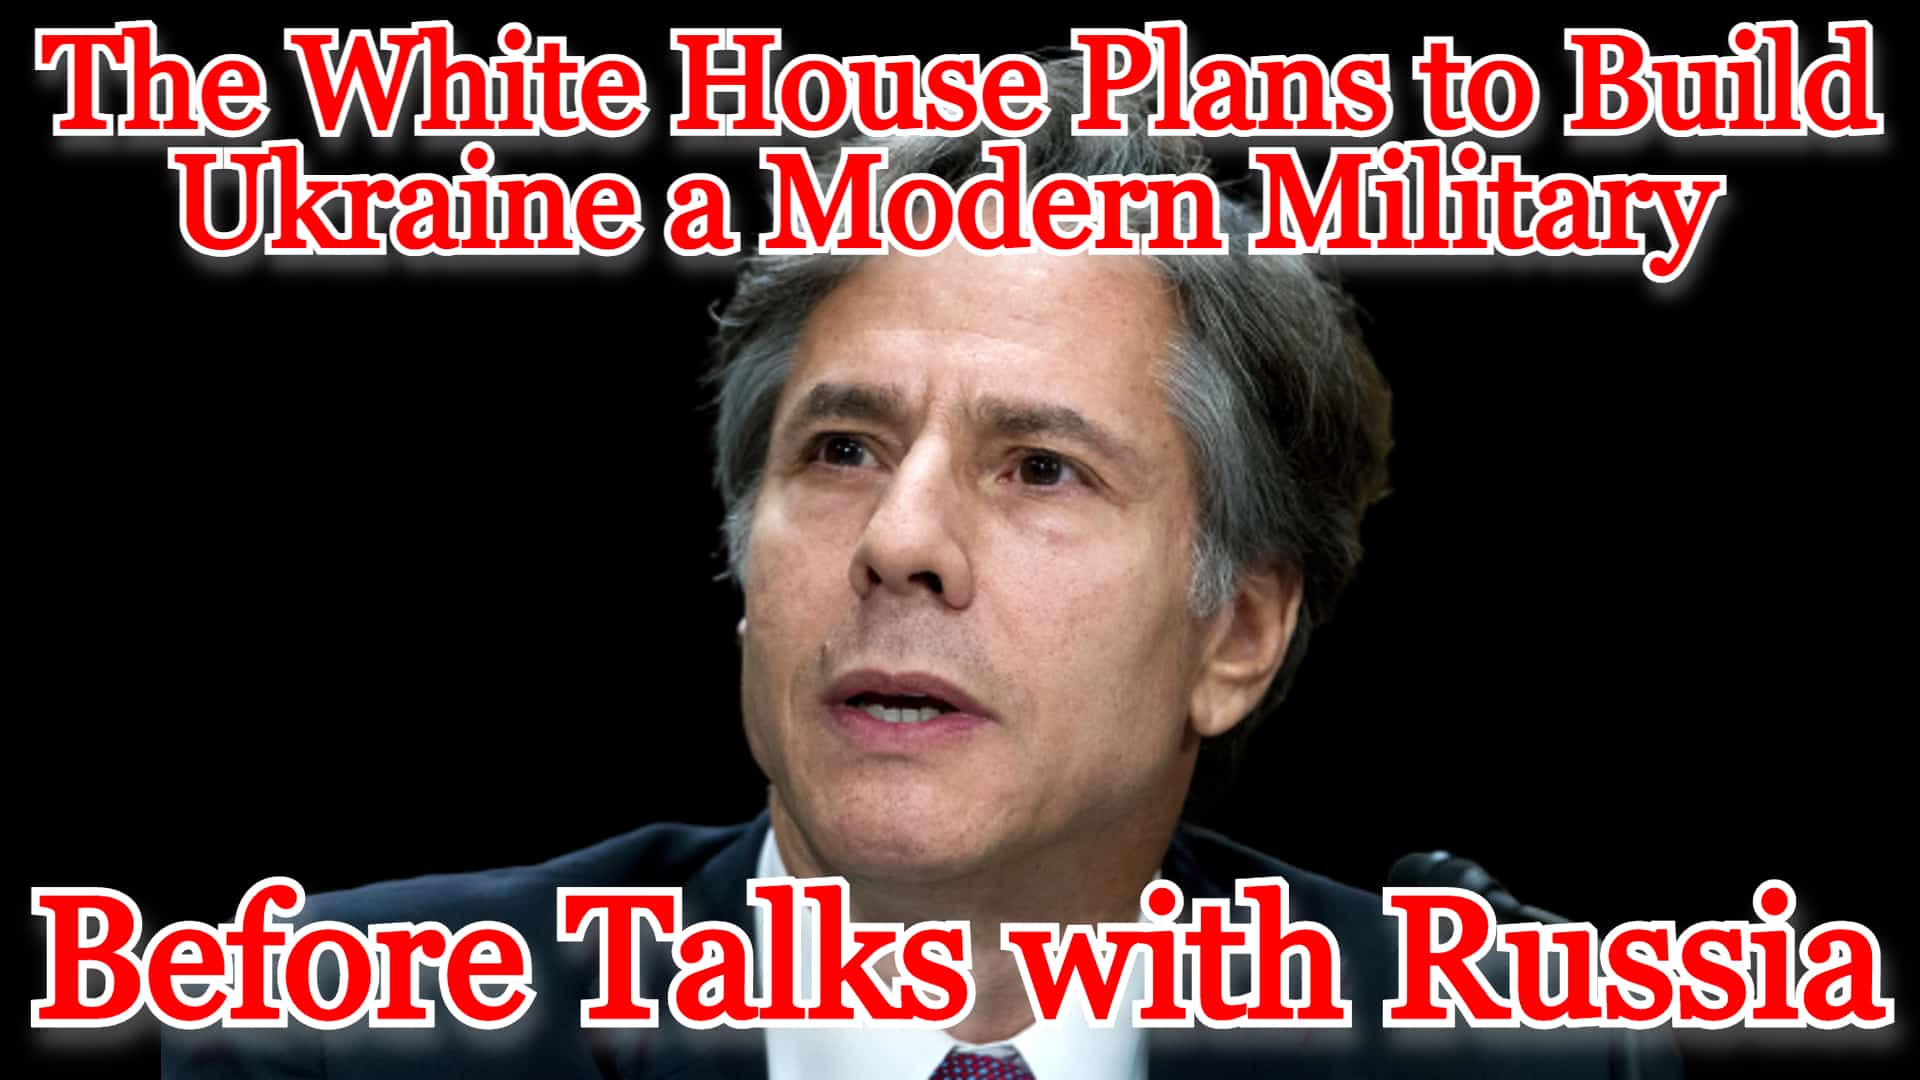 COI #430: The White House Plans to Build Ukraine a Modern Military Before Talks with Russia